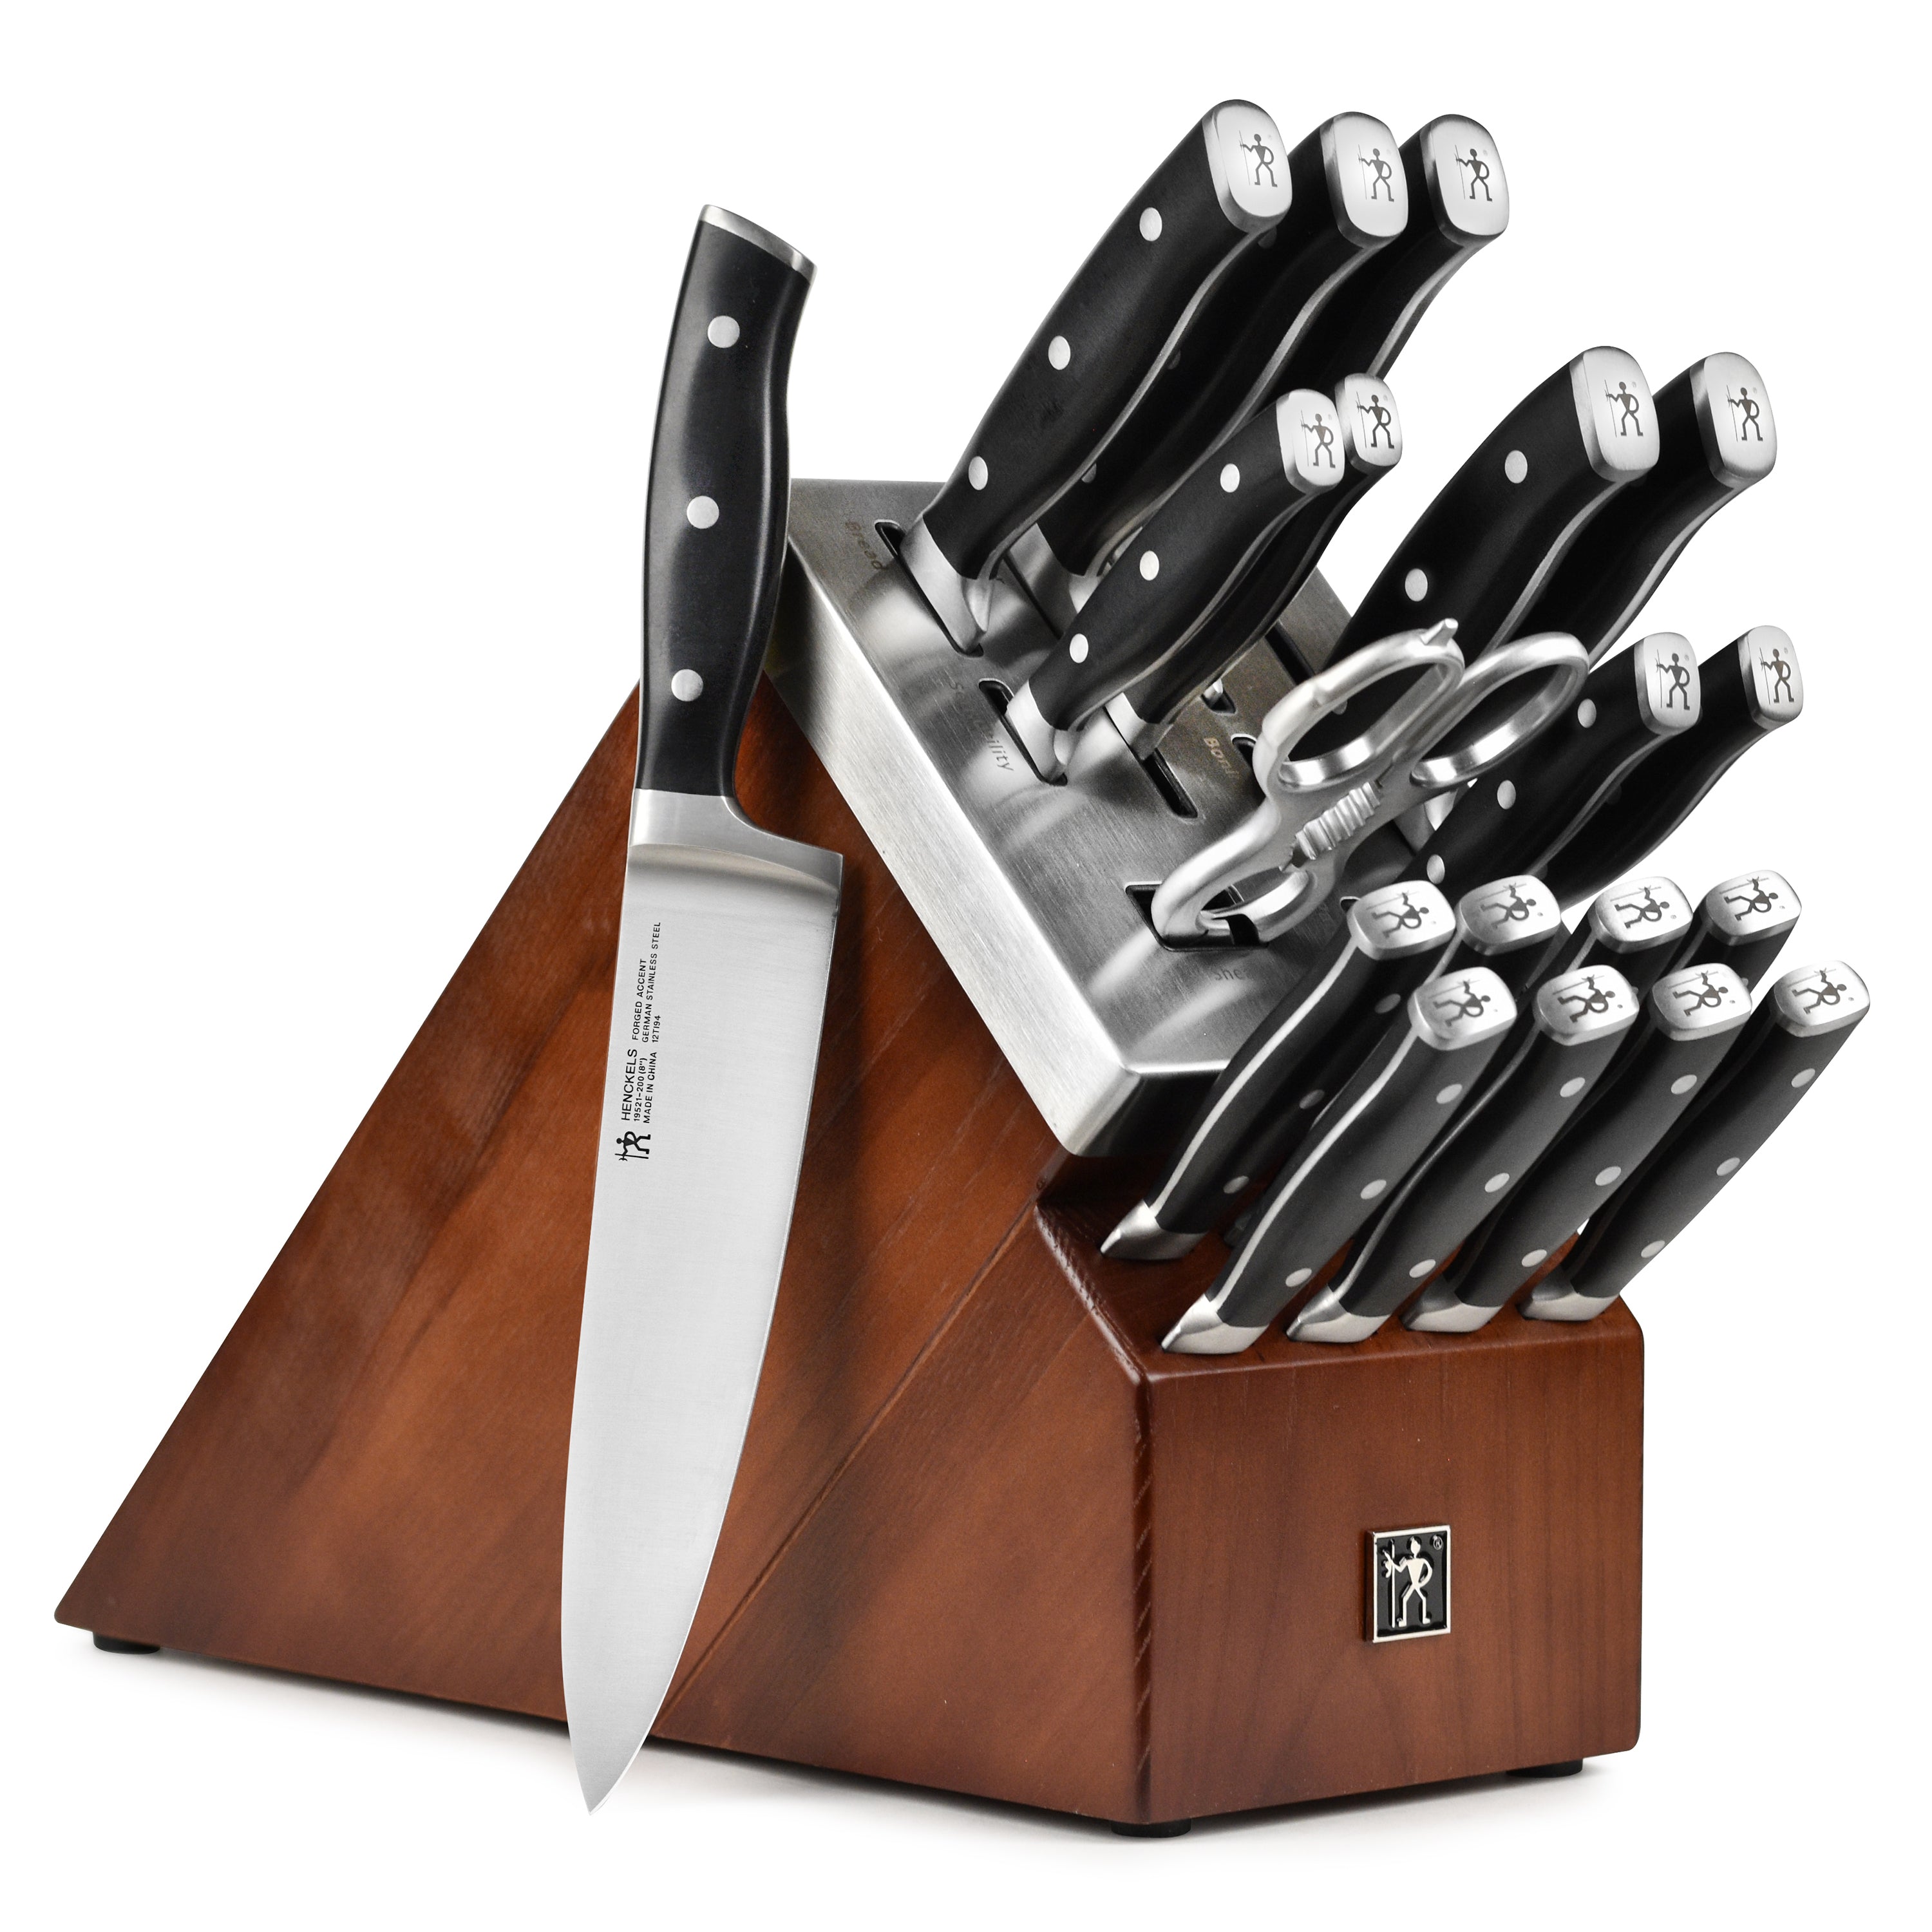 6 Piece Kitchen Knife Set With Block and Sharpener 